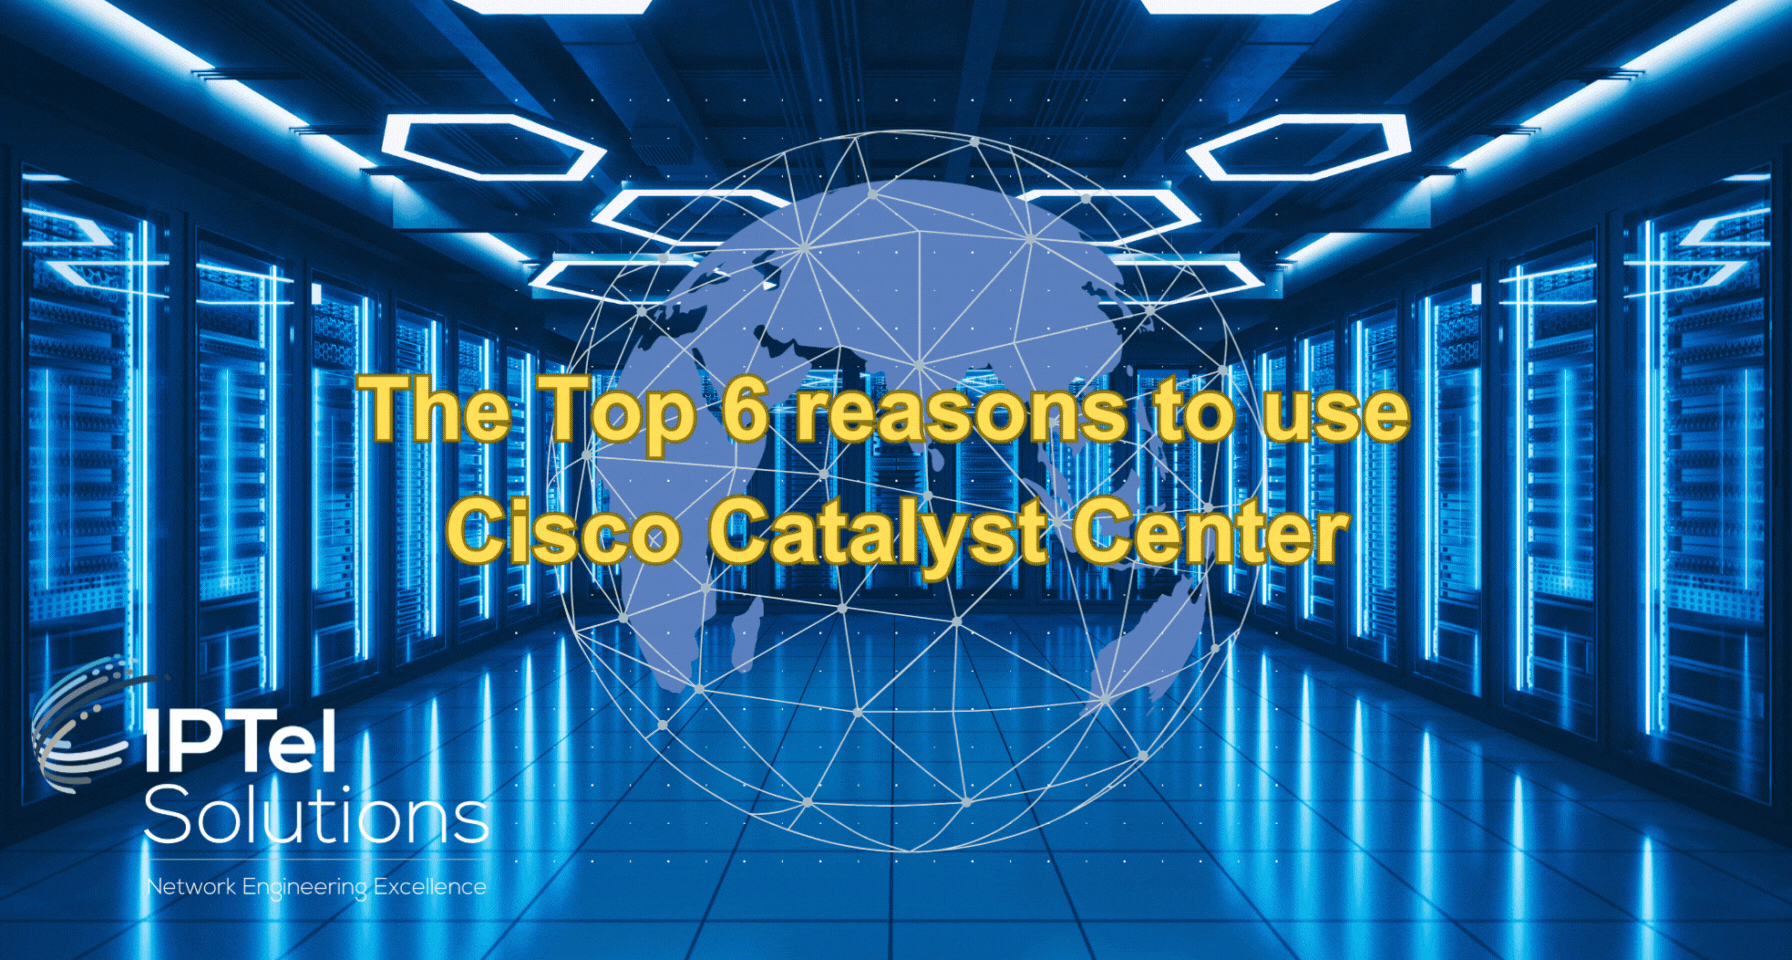 The Top 6 reasons to use Cisco Catalyst Center